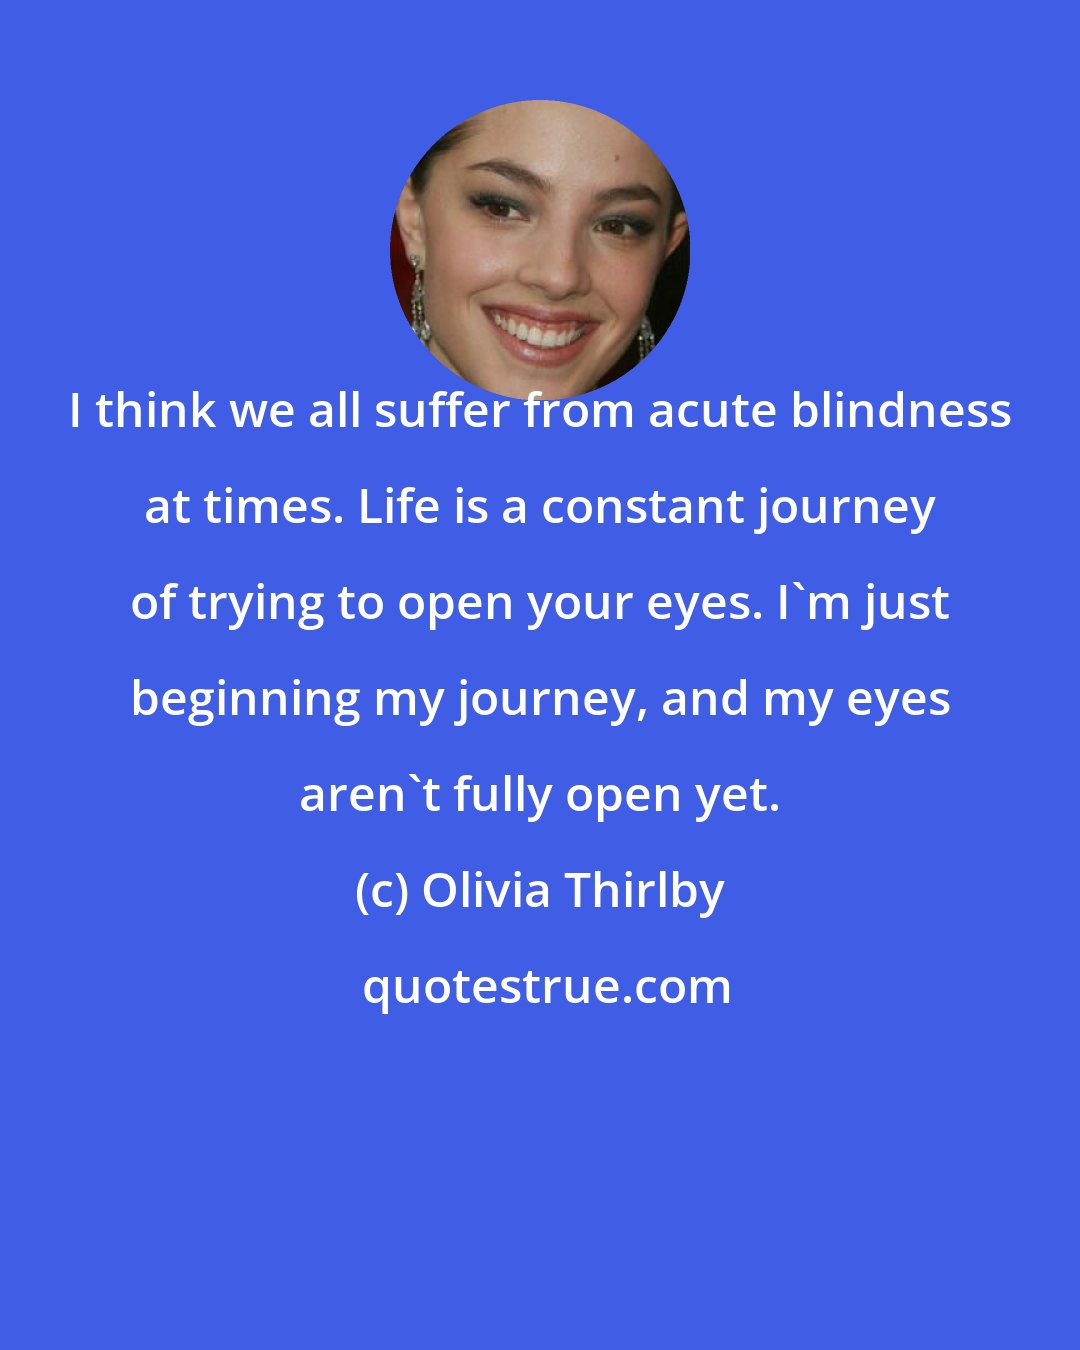 Olivia Thirlby: I think we all suffer from acute blindness at times. Life is a constant journey of trying to open your eyes. I'm just beginning my journey, and my eyes aren't fully open yet.